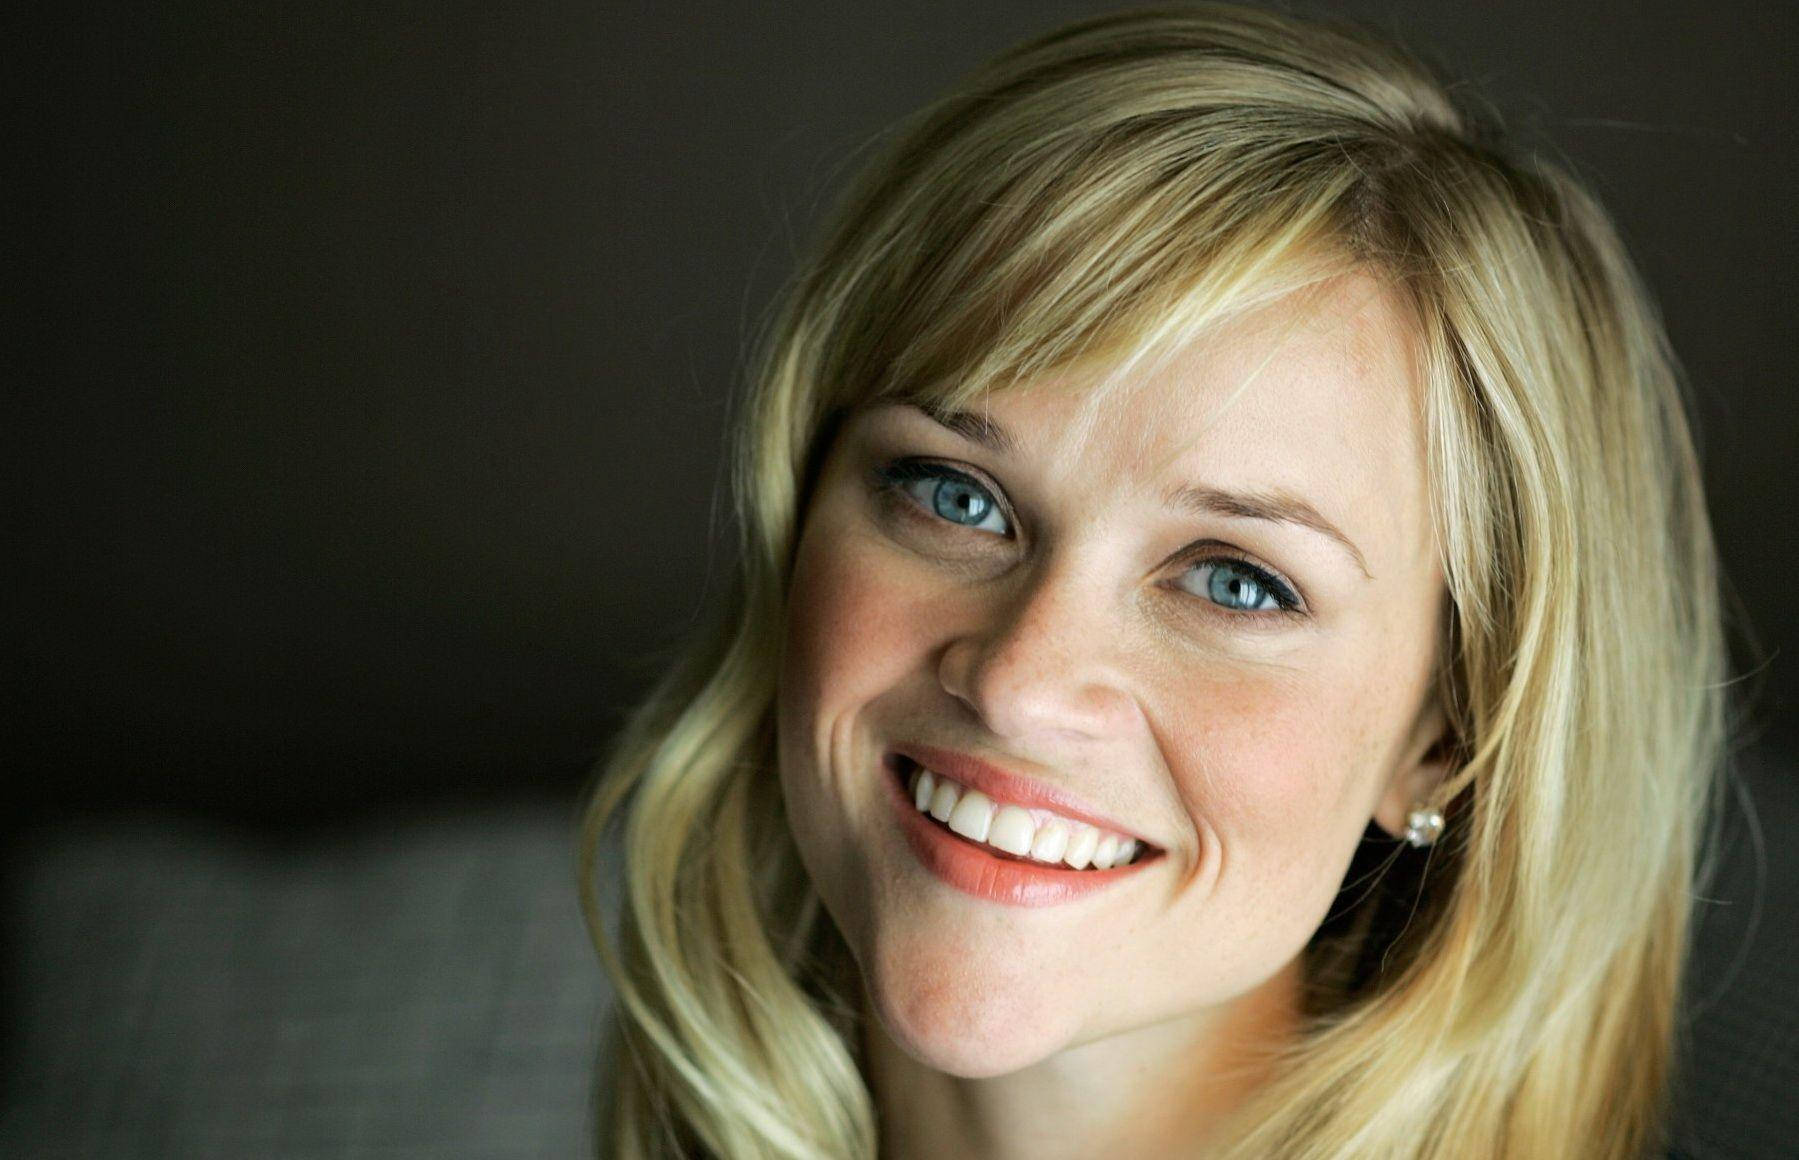 Reese Witherspoon Perfect Smile Background